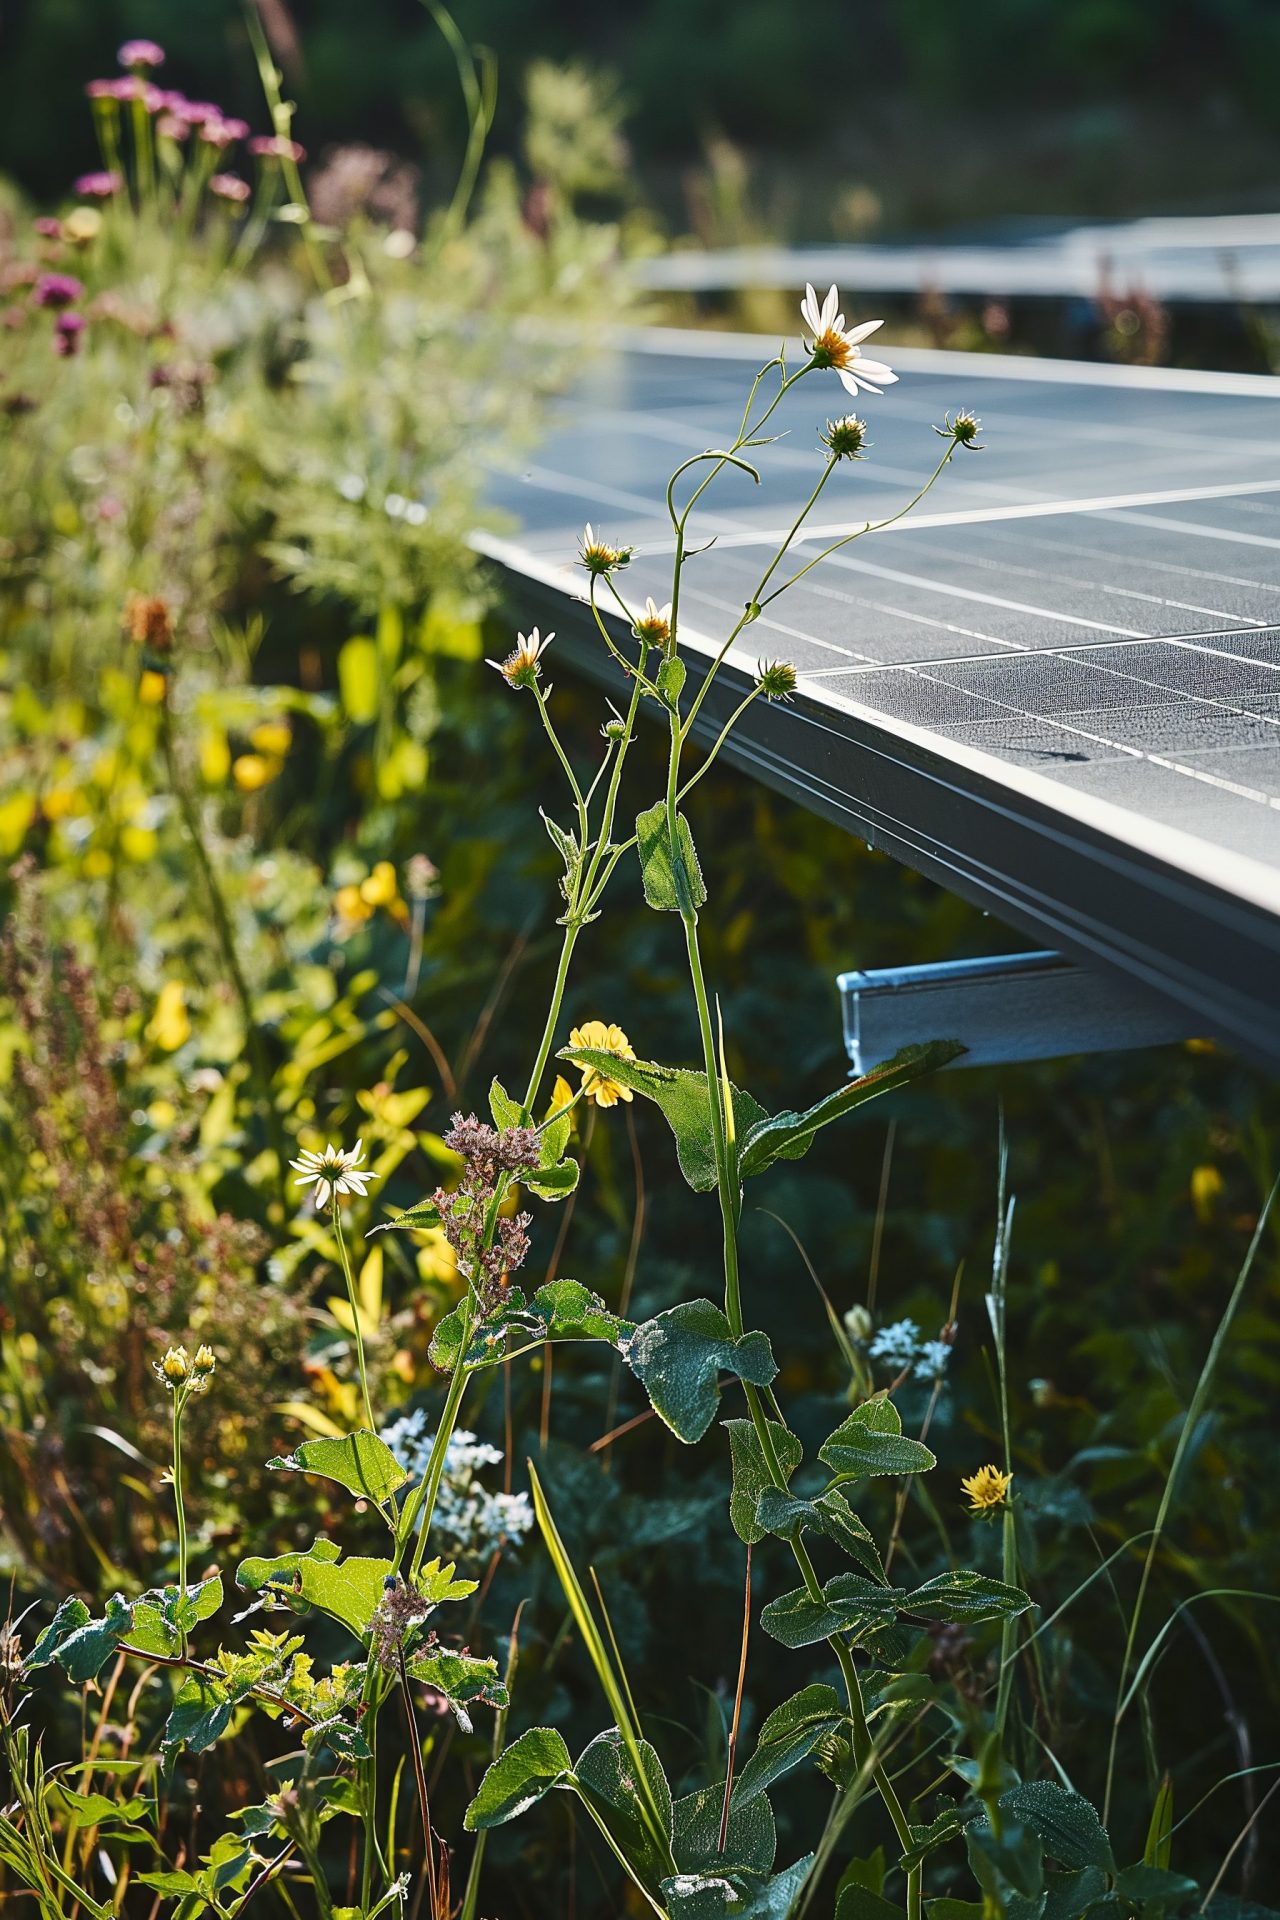 Flowers next to a solar module in the sunlight.